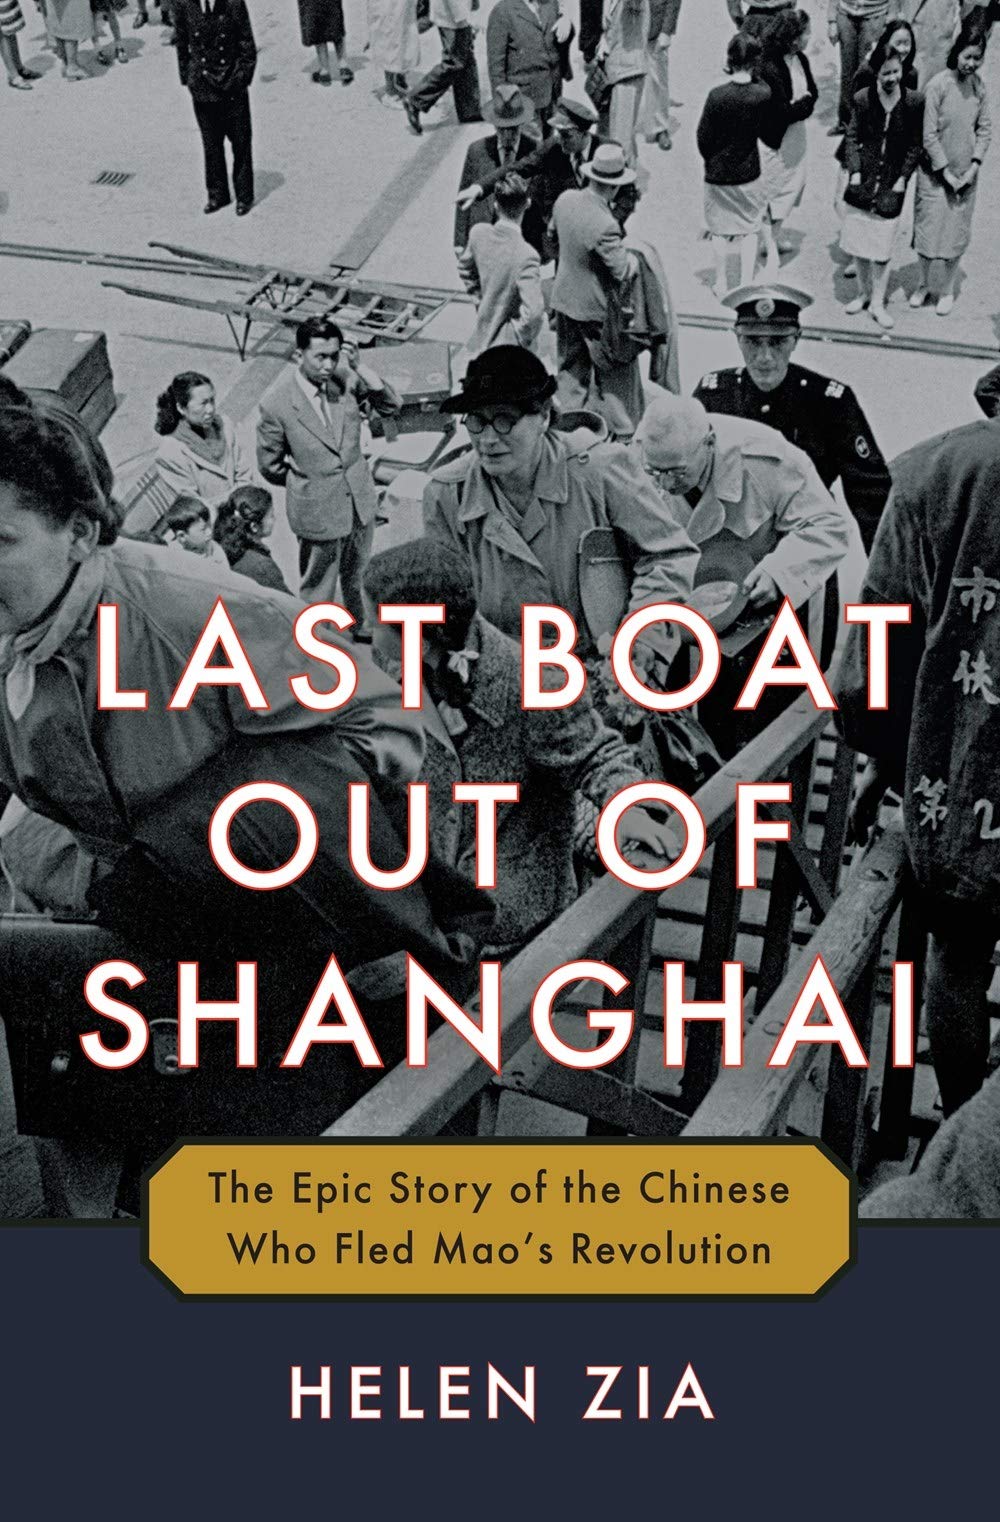 Cover of "Last Boat Out of Shanghai" by Helen Zia